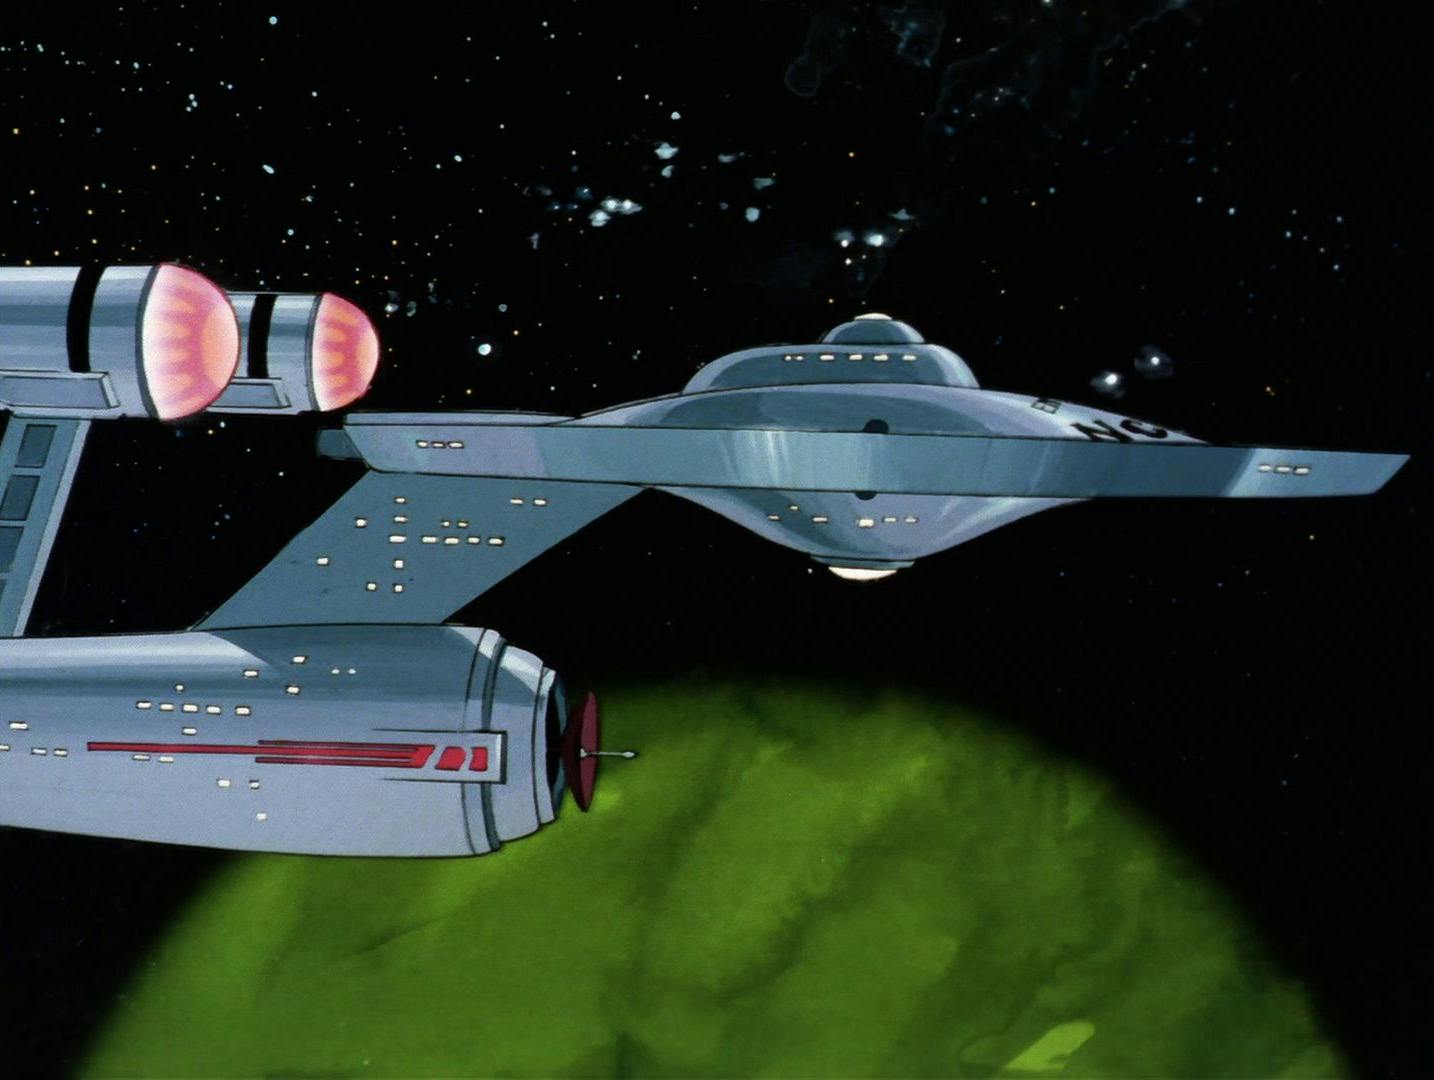 The animated depiction of the U.S.S. Enterprise in 'Bem'